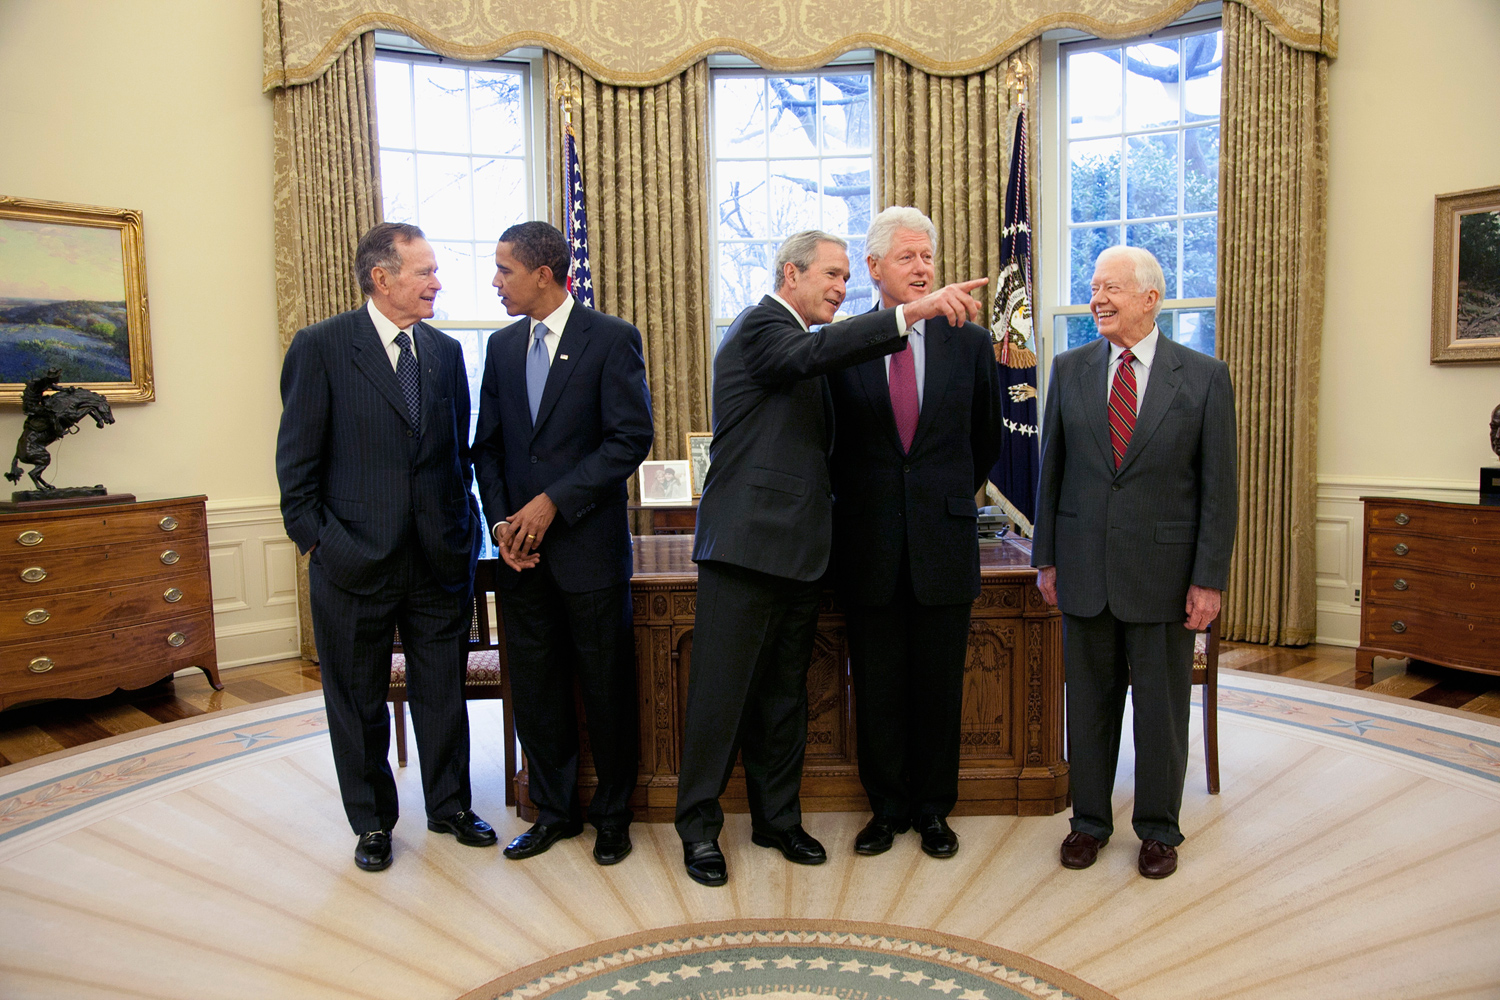 Jan. 7, 2009. President Bush leads a photo opportunity with former presidents Jimmy Carter, George H. W. Bush, Bill Clinton and President-Elect Barack Obama in the Oval Office. The five presidents sat down together for lunch following the meeting.